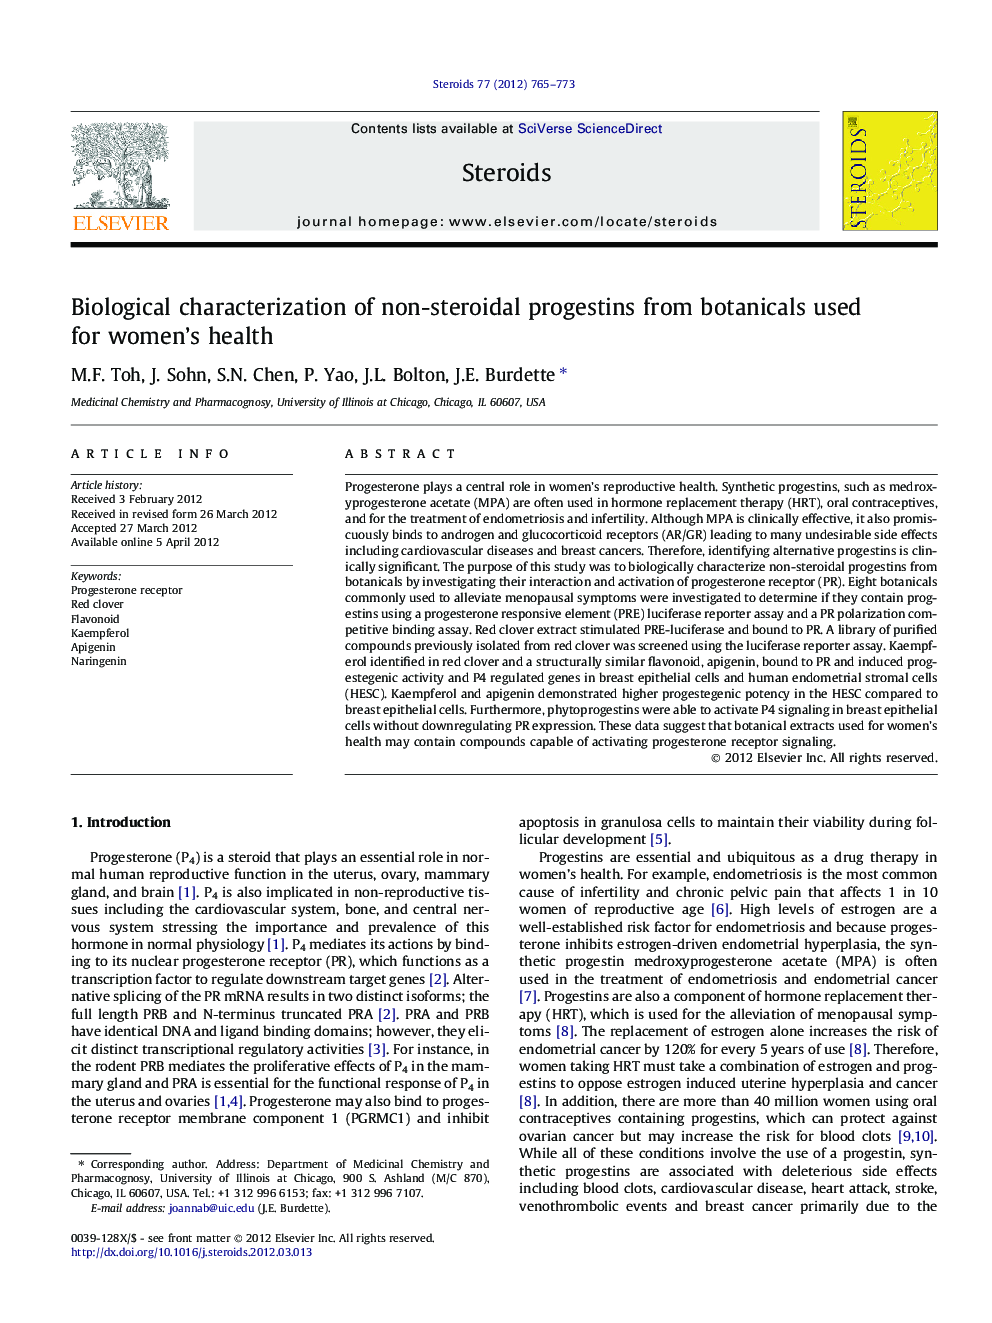 Biological characterization of non-steroidal progestins from botanicals used for women’s health